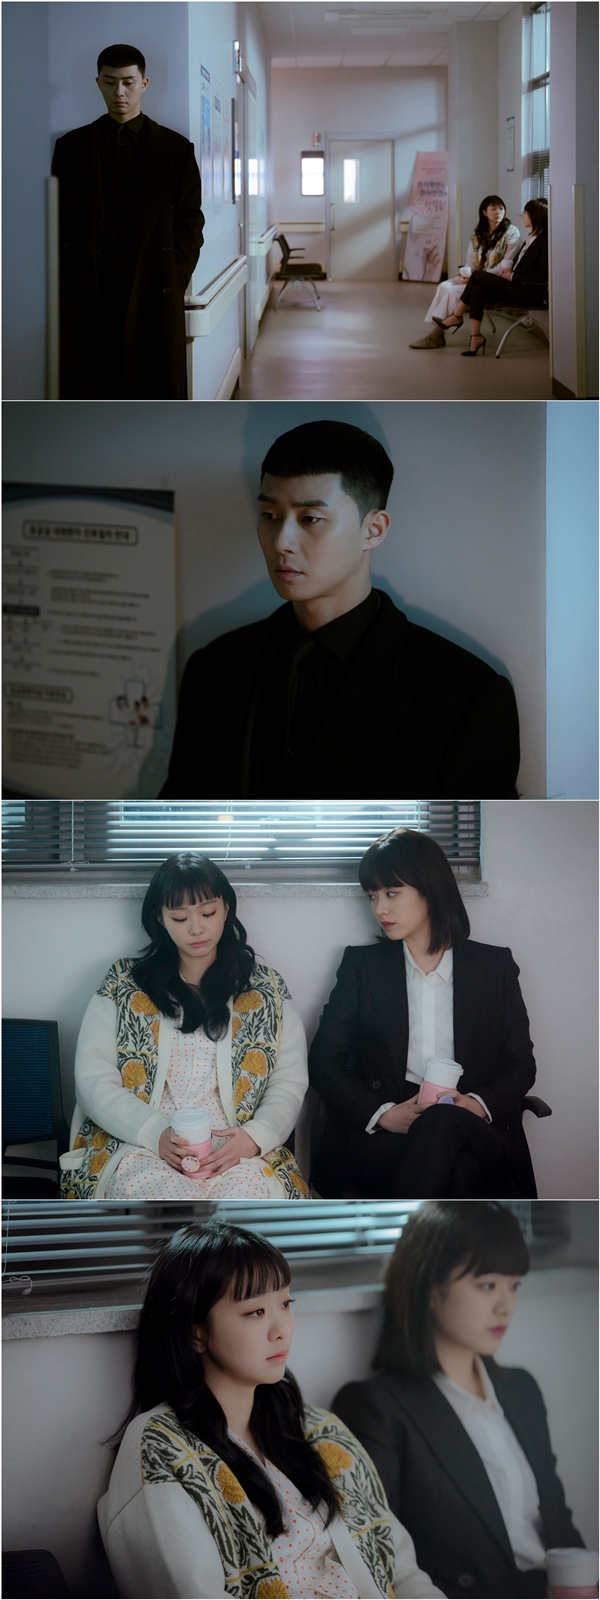 The Arousal of Itaewon Klath Park Seo-joon beginsJTBCs gilt drama Itaewon Klath (playplayed by Cho Kwang-jin and director Kim Sung-yoon) unveiled Park Sae-ro-yi (Park Seo-joon) listening to the conversation between Joy Seo (Kim Da-mi) and Ma Hyun-yi (Lee Joo-young) at a distance-footed on the 14th.In the last broadcast, four years have passed and the hot rebellion of Park Sae-ro-yi, still in progress, has been drawn.The single night, which grew from Itaewons small fortifications to Inc. I.C., was now closely following the peak of the catering industry.But Park Sae-ro-yi, who learned that Jang Dae-hee (Yoo Jae-myung) was sentenced to cancer before the final counterattack, pledged his final revenge.Park Sae-ro-yi, who is promising a reunion soon, and the cool eyes of Chang, gave overwhelming tension.In the meantime, the affectionate distance between Park Sae-ro-yi and Joy in the public photos stimulates curiosity.Joy Seo and Ma Hyun Lee, who are more emaciated than before, are talking in the hospital corridor.Park Sae-ro-yis eyes, which hear the stories of the two in a distant-footed, are quite different.In the previous preview video, I am raising expectations by suggesting changes to Park Sae-ro-yis Arousal, which is confused by the feelings toward him, in Joys Confessions, I have to be the person I need to say anything.It is noteworthy whether Joys four-year unrequited love can lead to bilateral romance.Joys straight line continues on the 14th broadcast Itaewon Clath.Joys heartfelt I love you begins to permeate slowly and deeply to Park Sae-ro-yi.Meanwhile, Joy, who was overly clinging to the work of Inc. I.C to become a necessary person for Park Sae-ro-yi, falls overworked.The Arousal of Park Sae-ro-yi, who has realized the mind late, is also expected to be drawn together, and it is hoped that the hearts of the two people who have been mixed for a long time will finally reach out.The production team said, The heart of Park Sae-ro-yi, who has not been stuck in Joys long unrequited love and straight-line confessions, begins to move slowly. Please expect that the moment you face your heart and change and arousal will add to your excitement.